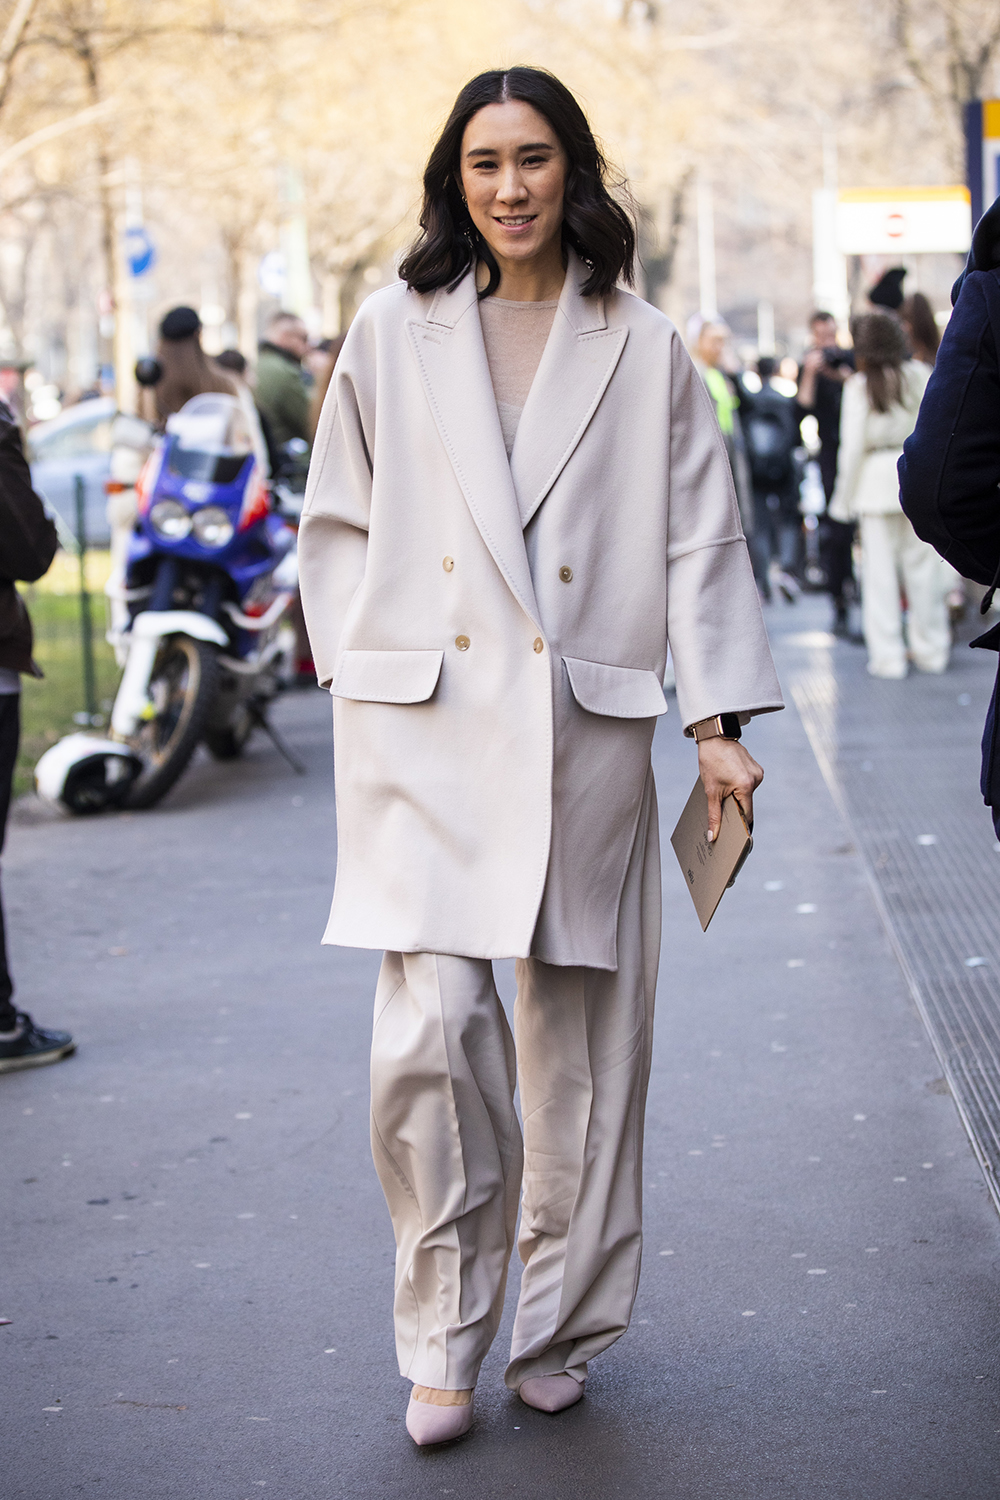 MILAN, ITALY - FEBRUARY 21: Eva Chen is seen outside Fendi on Day 2 Milan Fashion Week Autumn/Winter 2019/20 on February 21, 2019 in Milan, Italy. (Photo by Claudio Lavenia/Getty Images)